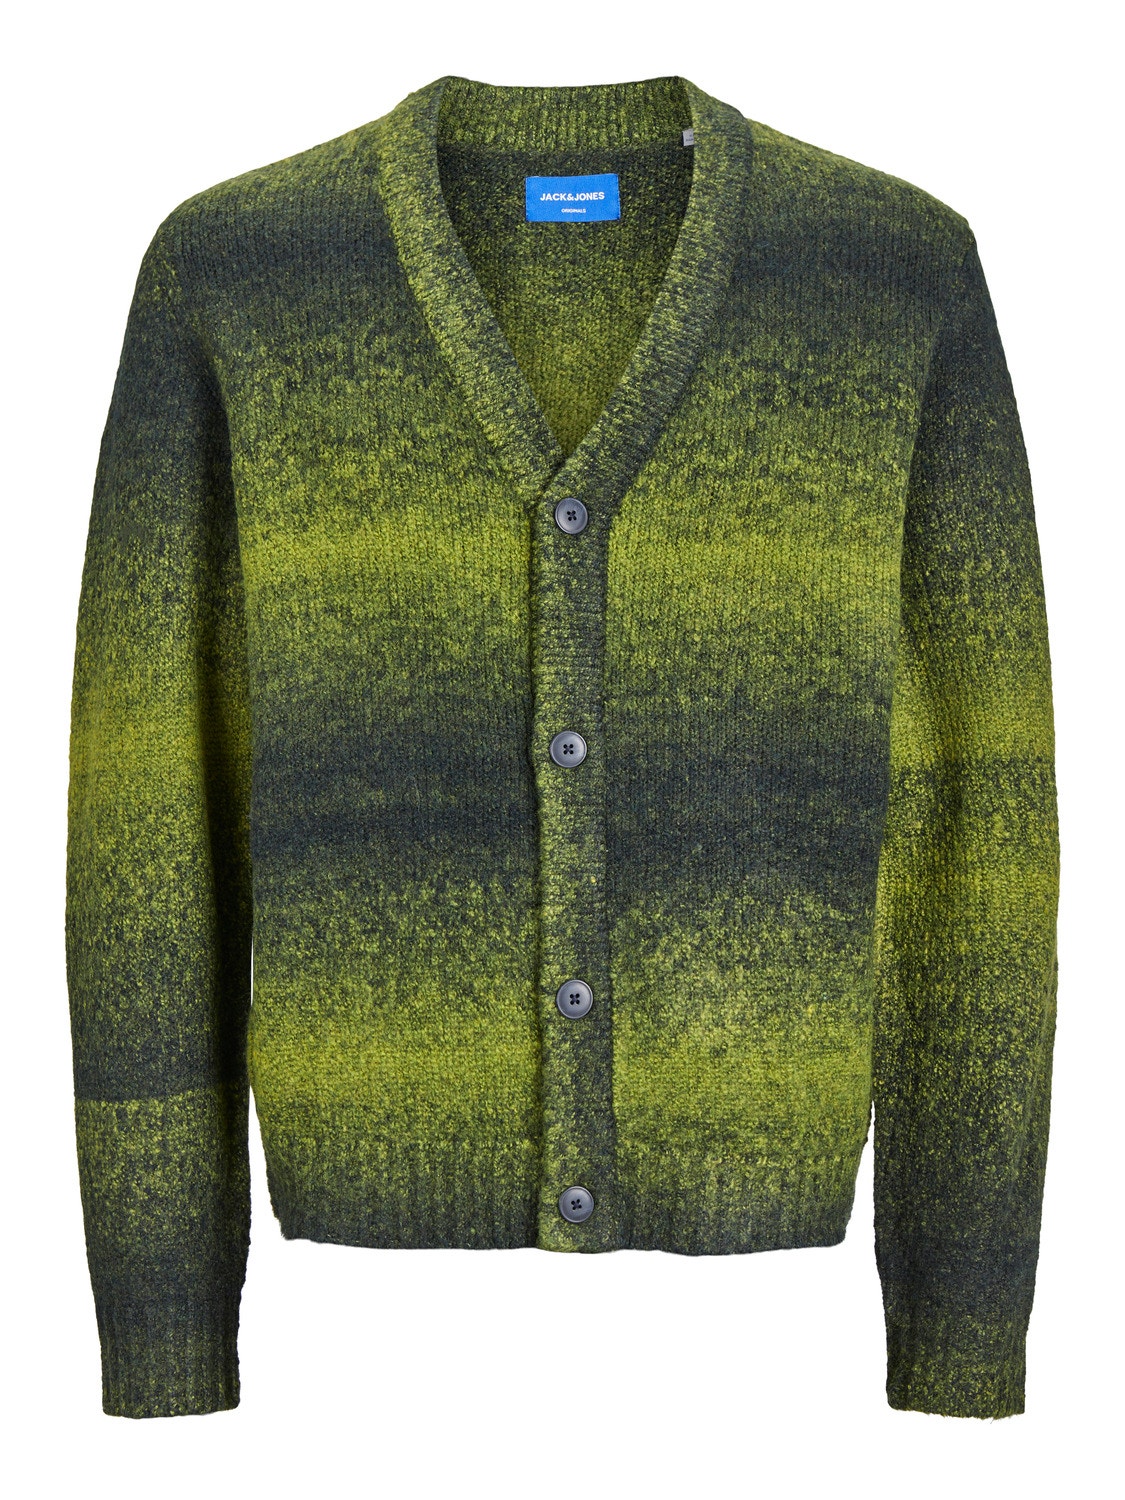 Jack & Jones Knitted cardigan -Magical Forest - 12246644